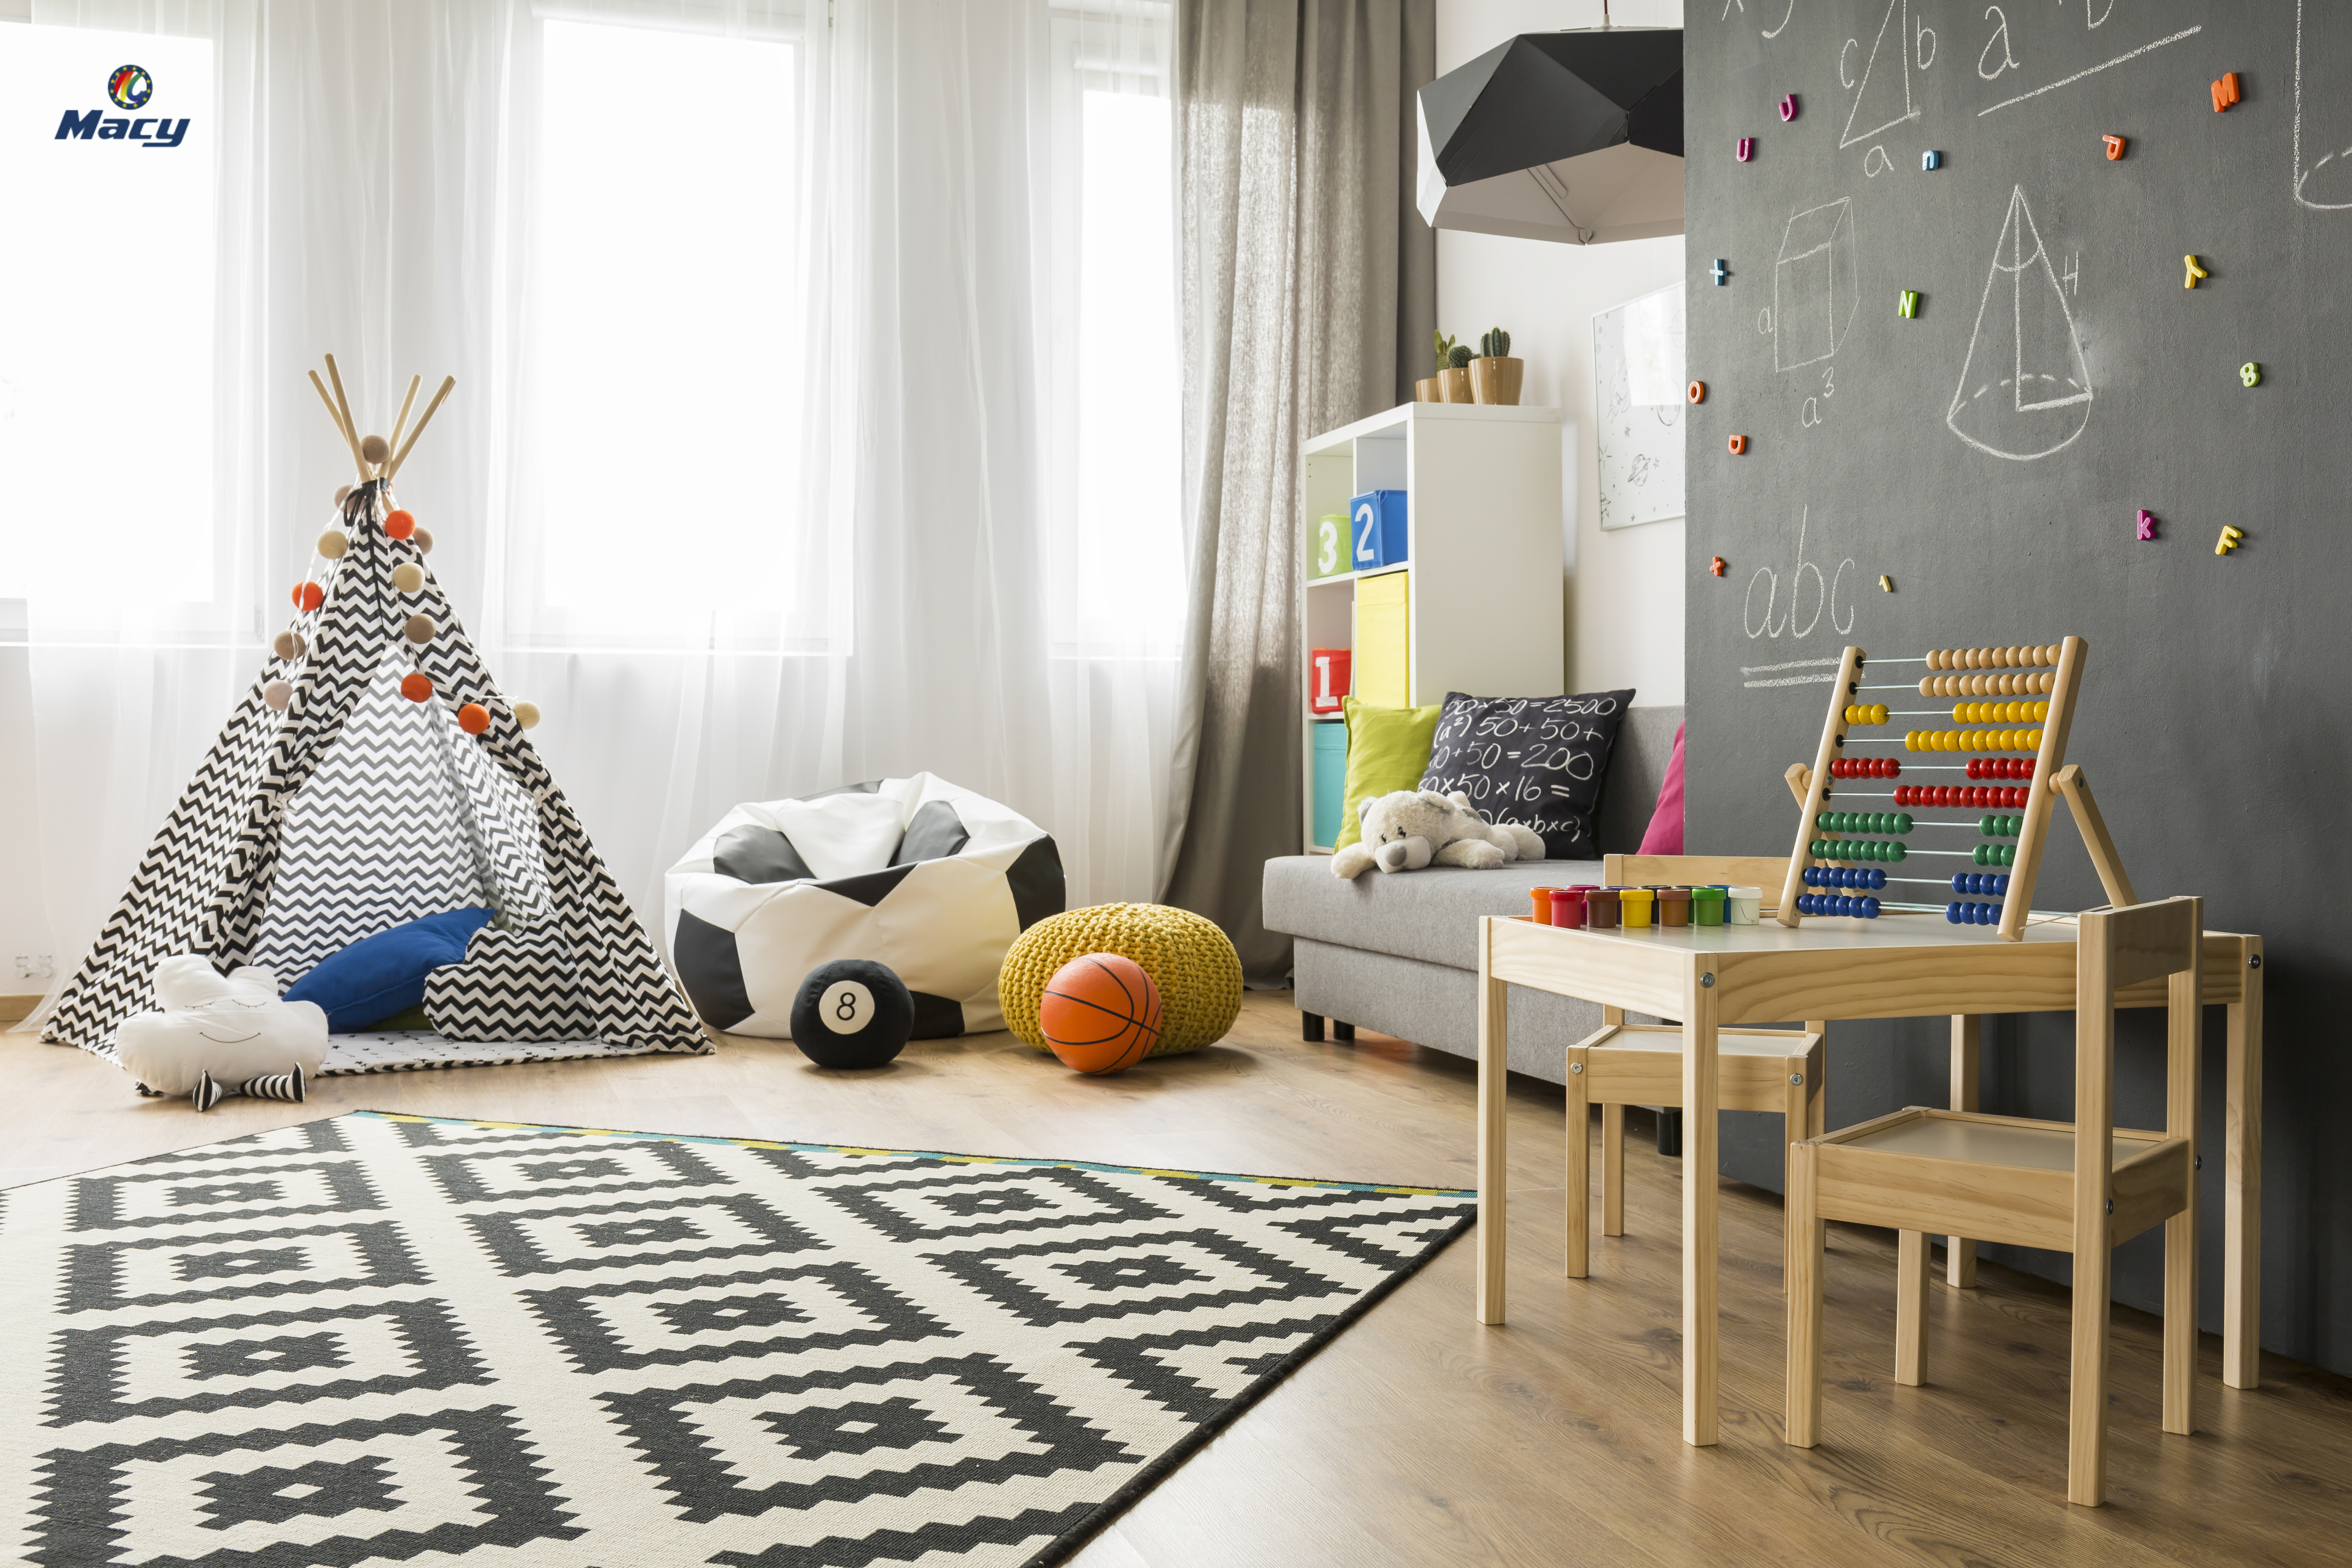 Tips to decorate the childrenâ€™s room